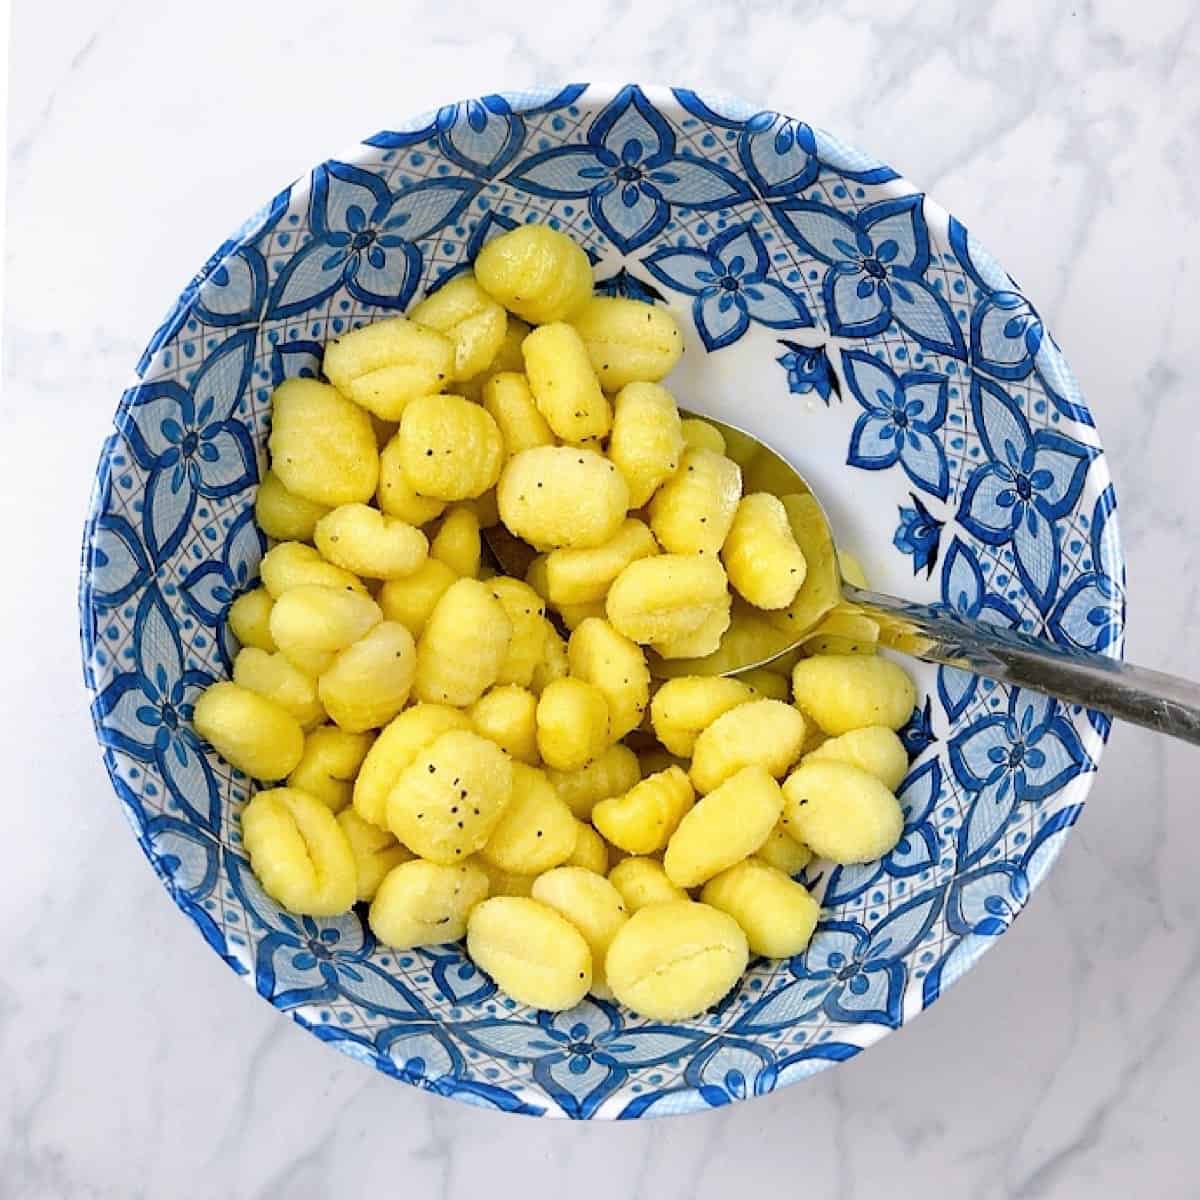 Gnocchi tossed in olive oil blue mixing bowl